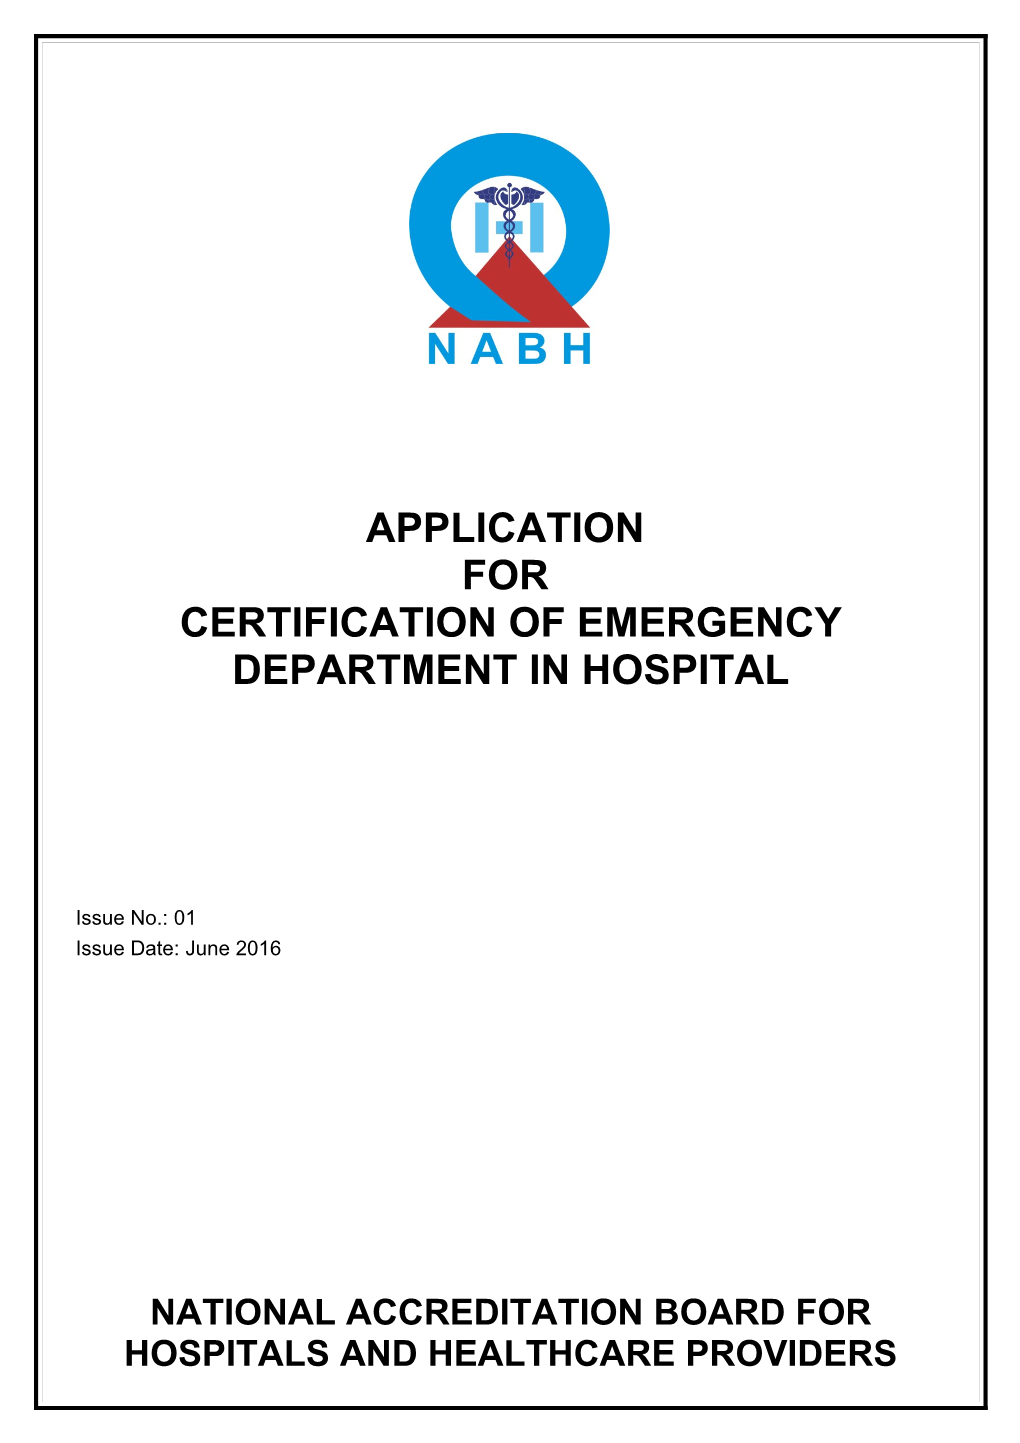 Certification of Emergency Department in Hospital